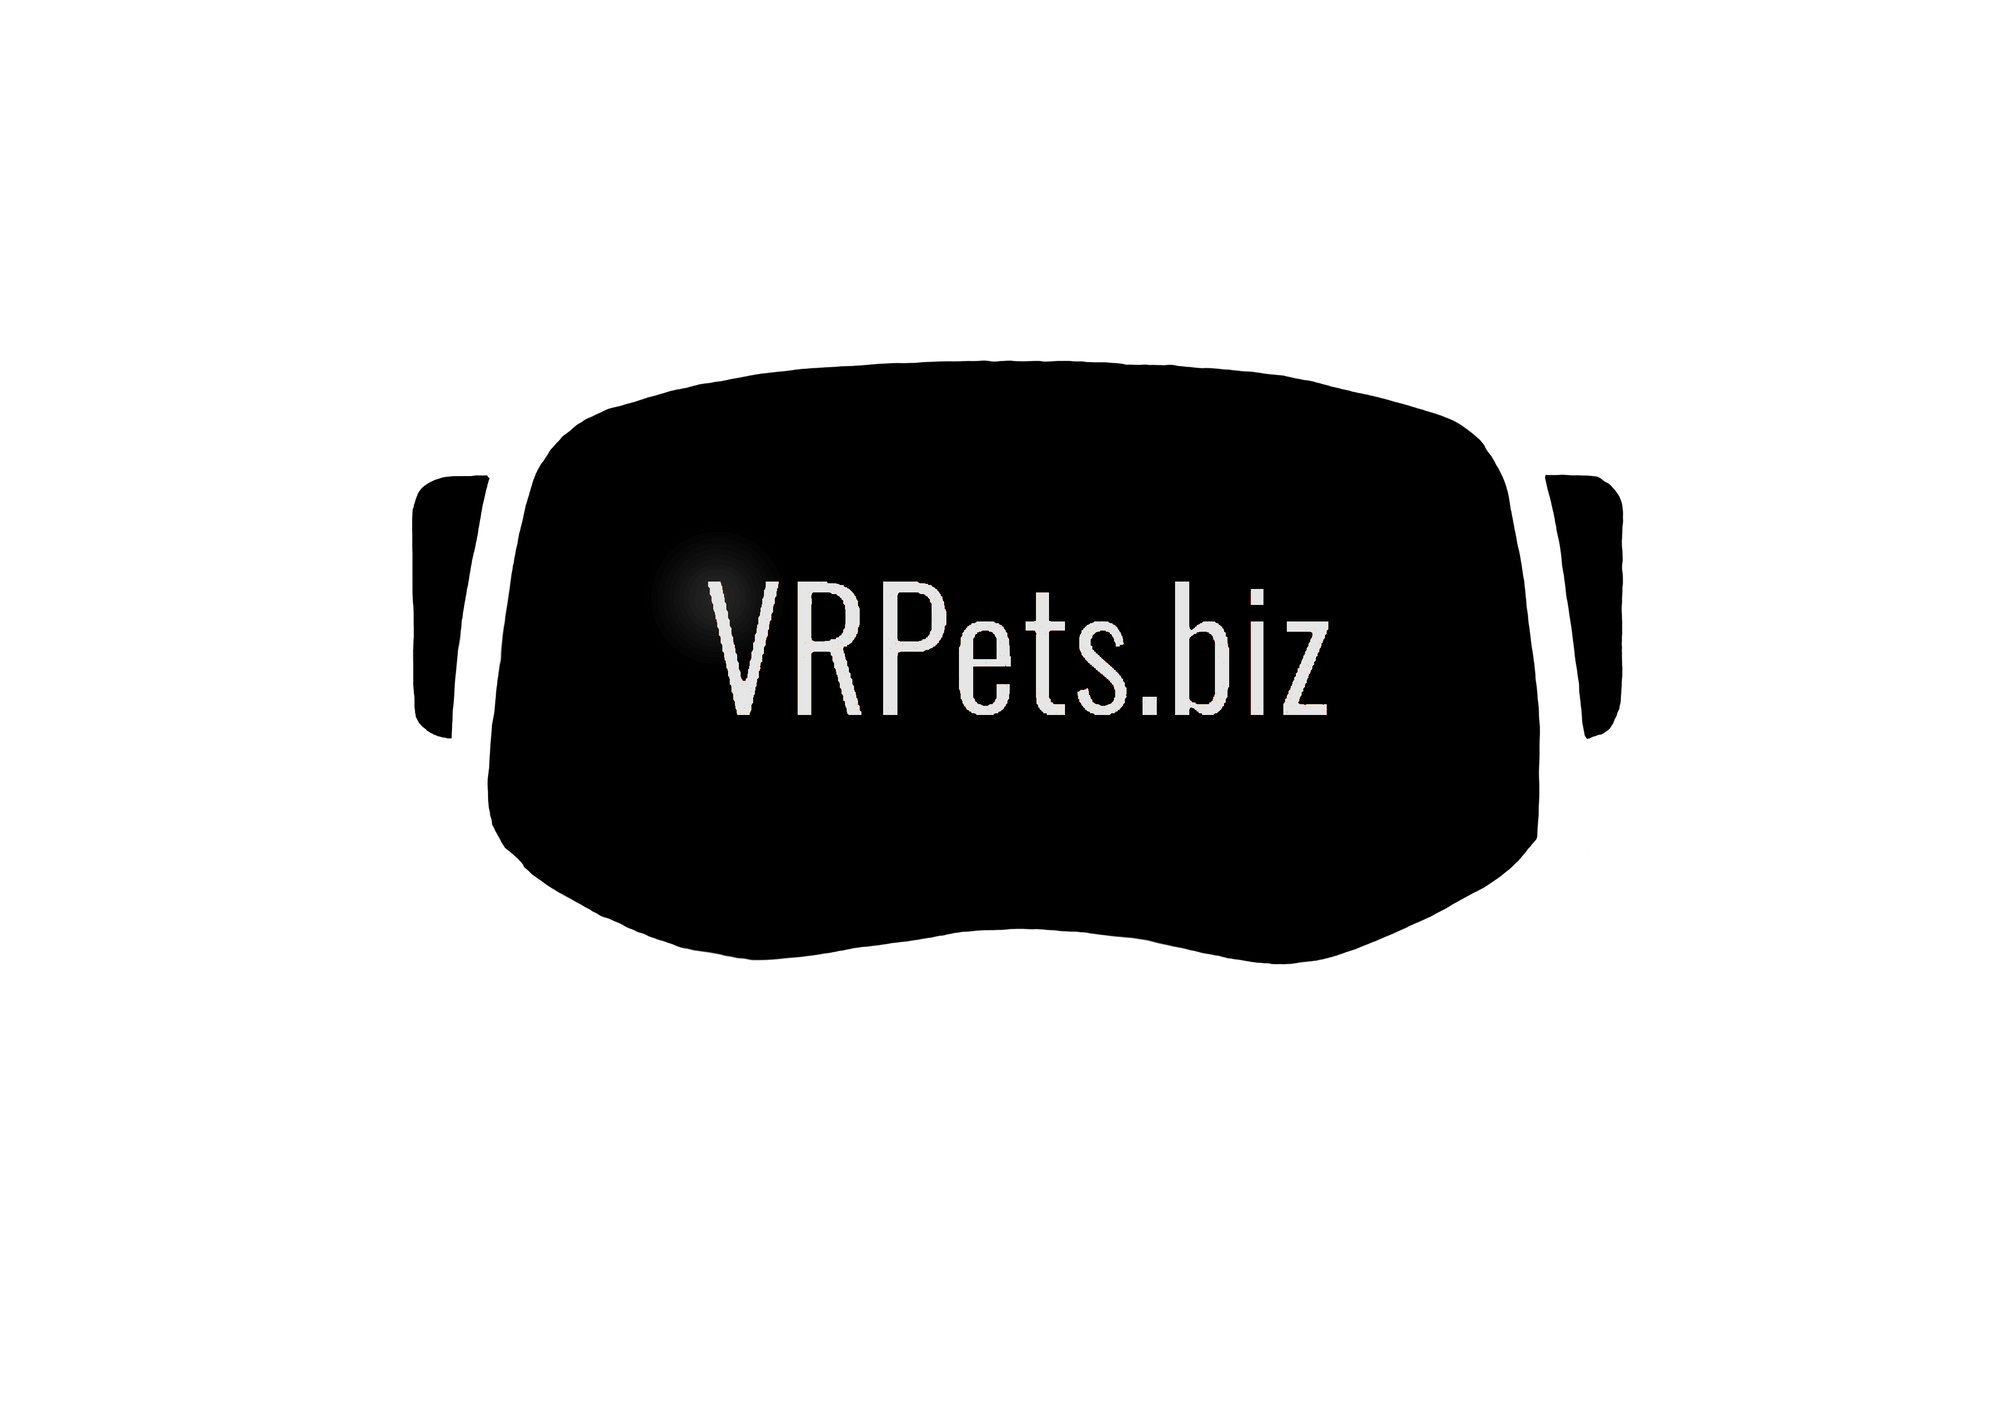 VRPets